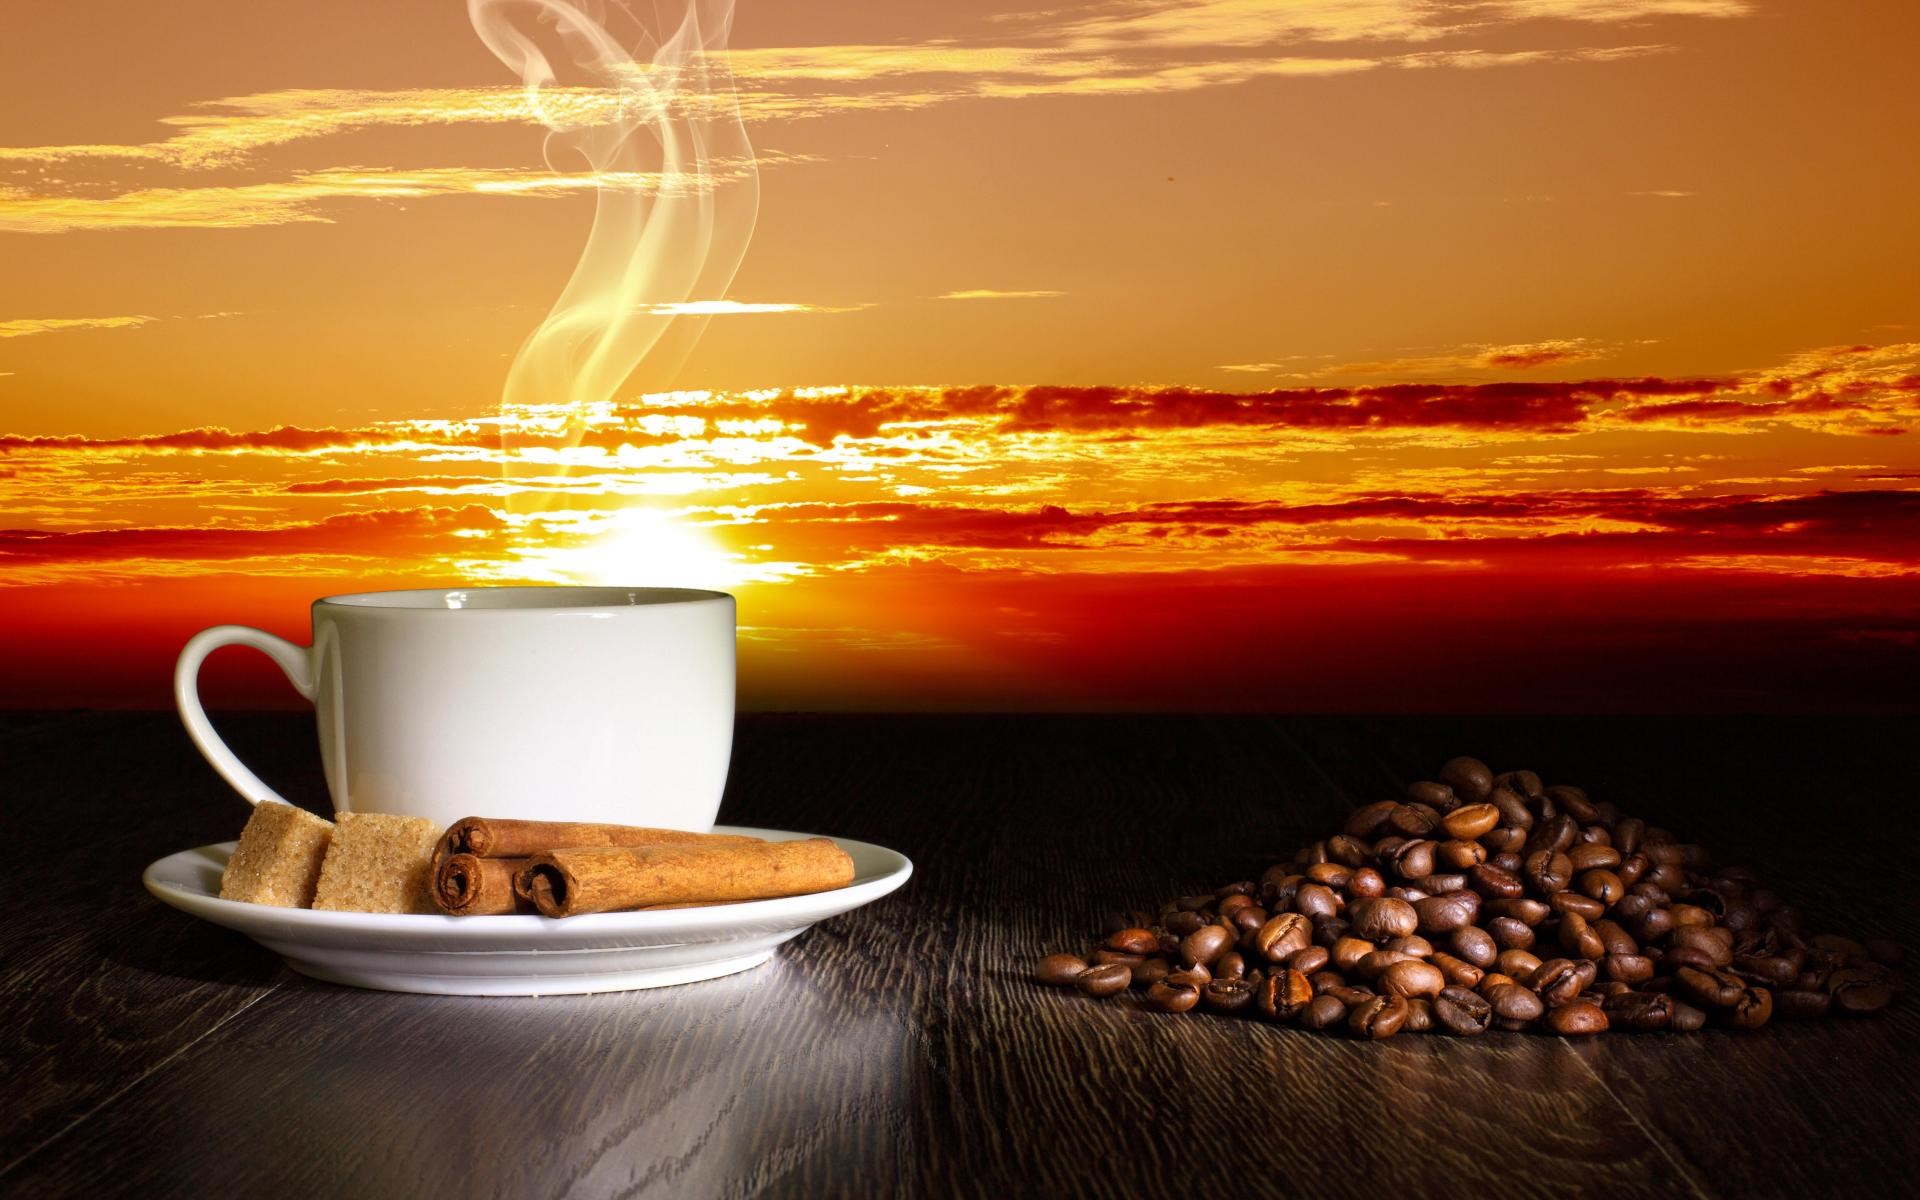 Morning Flavor Coffee Backgrounds Download - Morning Tea In Sunshine , HD Wallpaper & Backgrounds